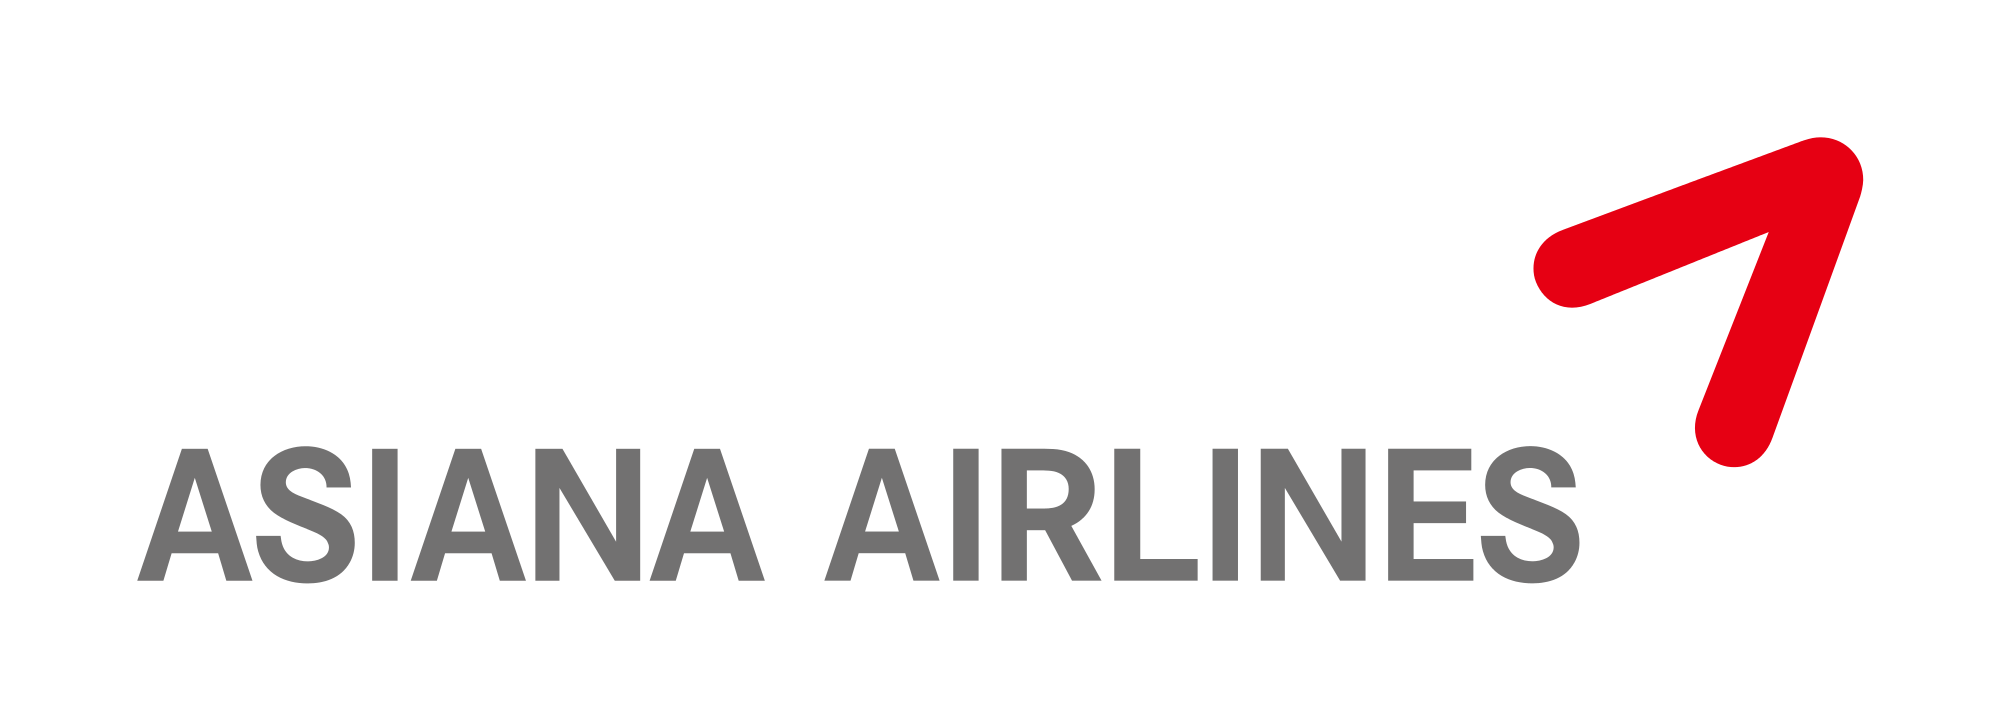 Open Hdpng.com  - Asiana Airlines, Transparent background PNG HD thumbnail